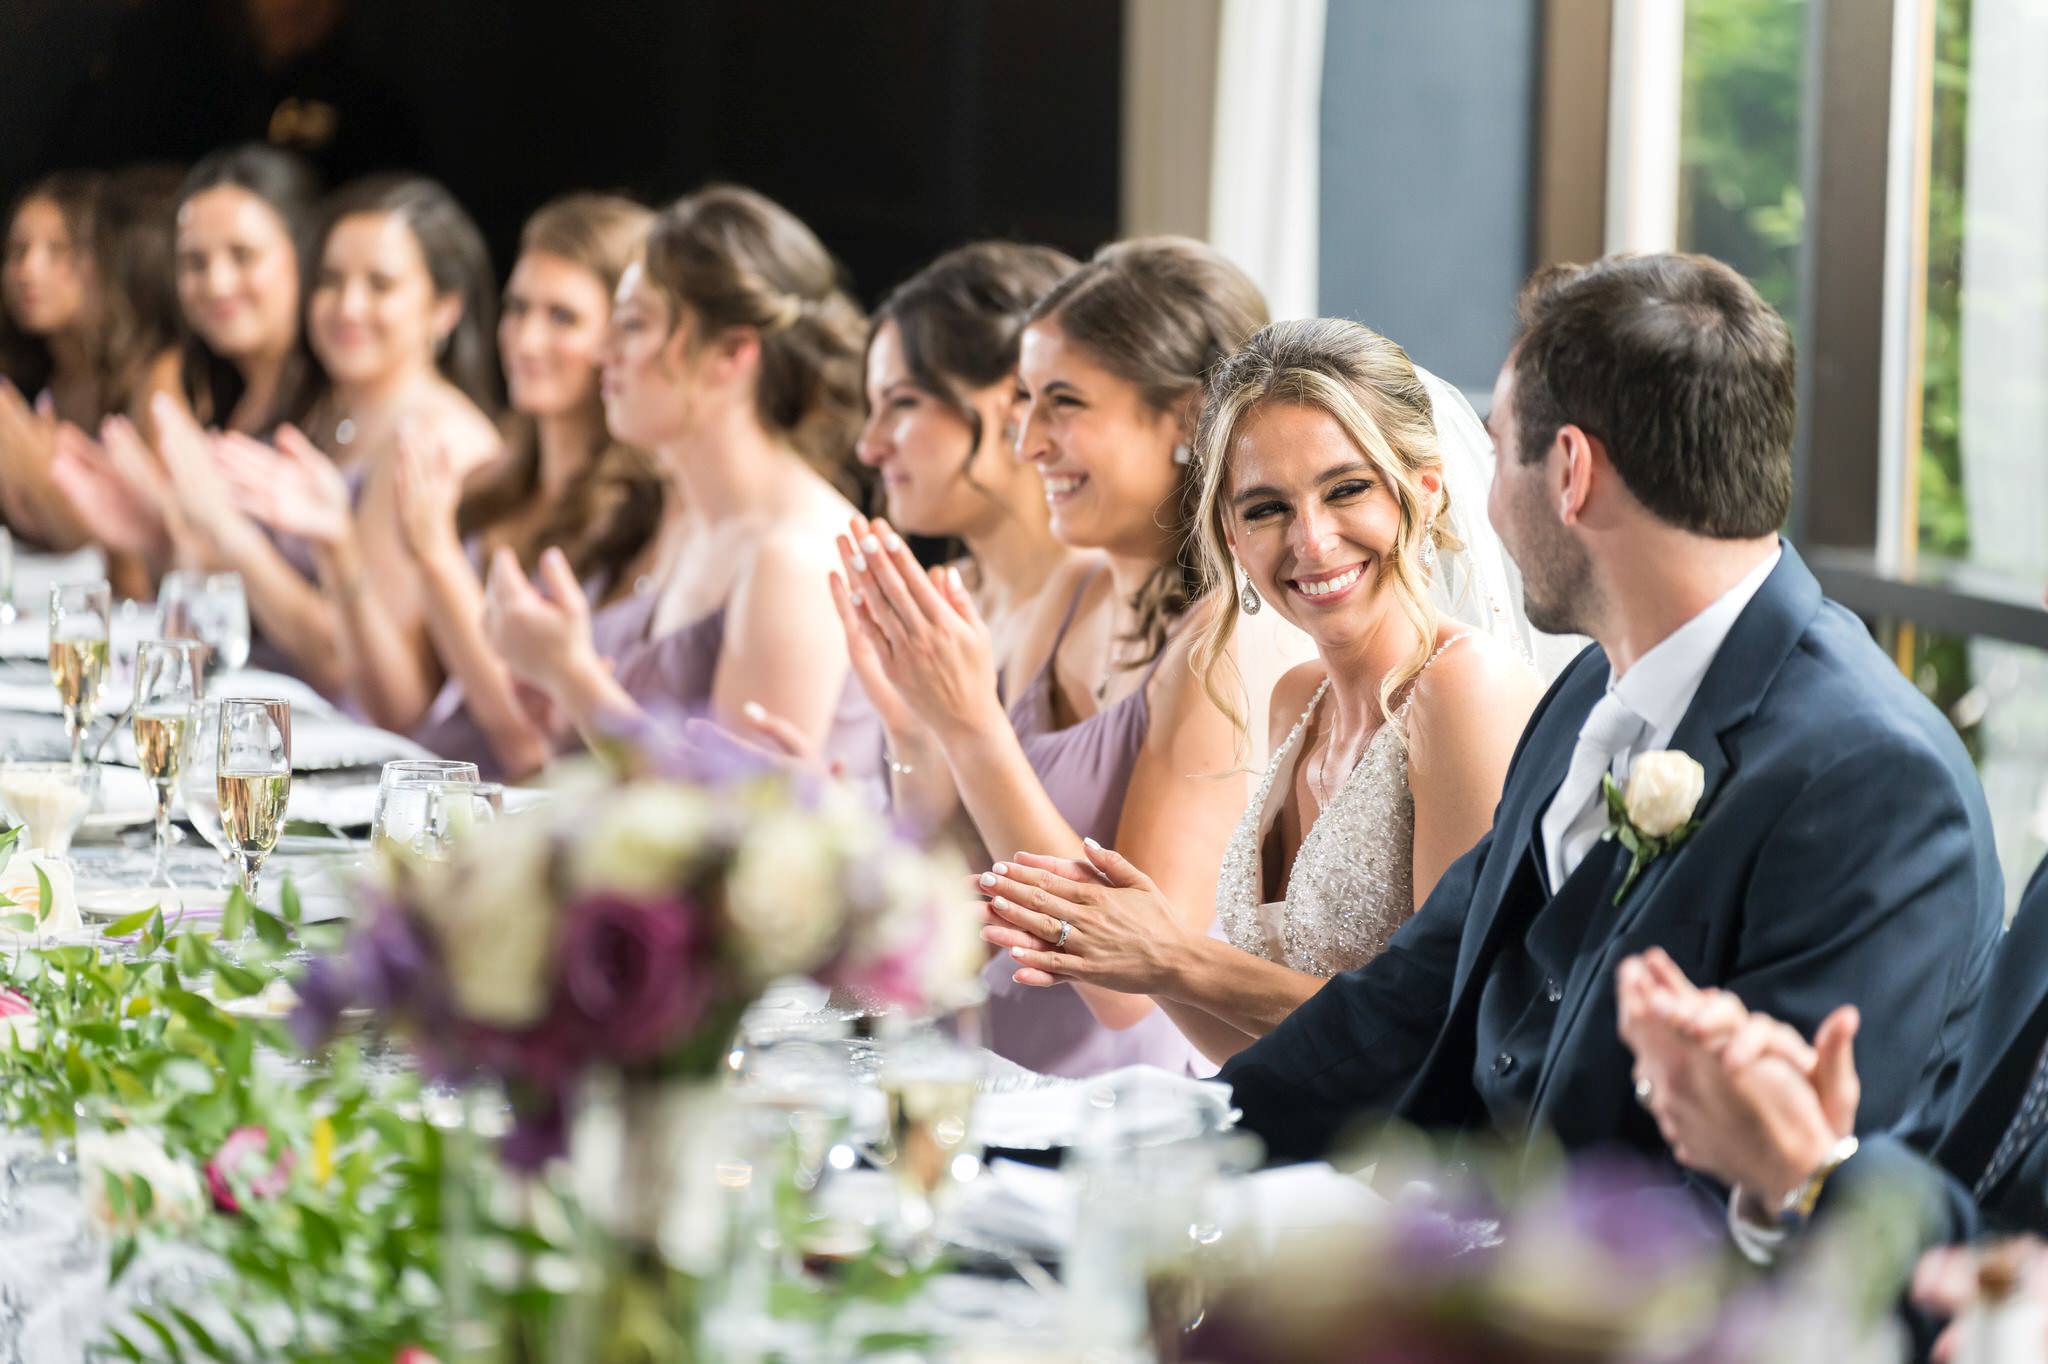 With a tear trickling down her cheek, a bride smiles at her husband during speeches at their Andiamo Showcase wedding in Warren, MI.  